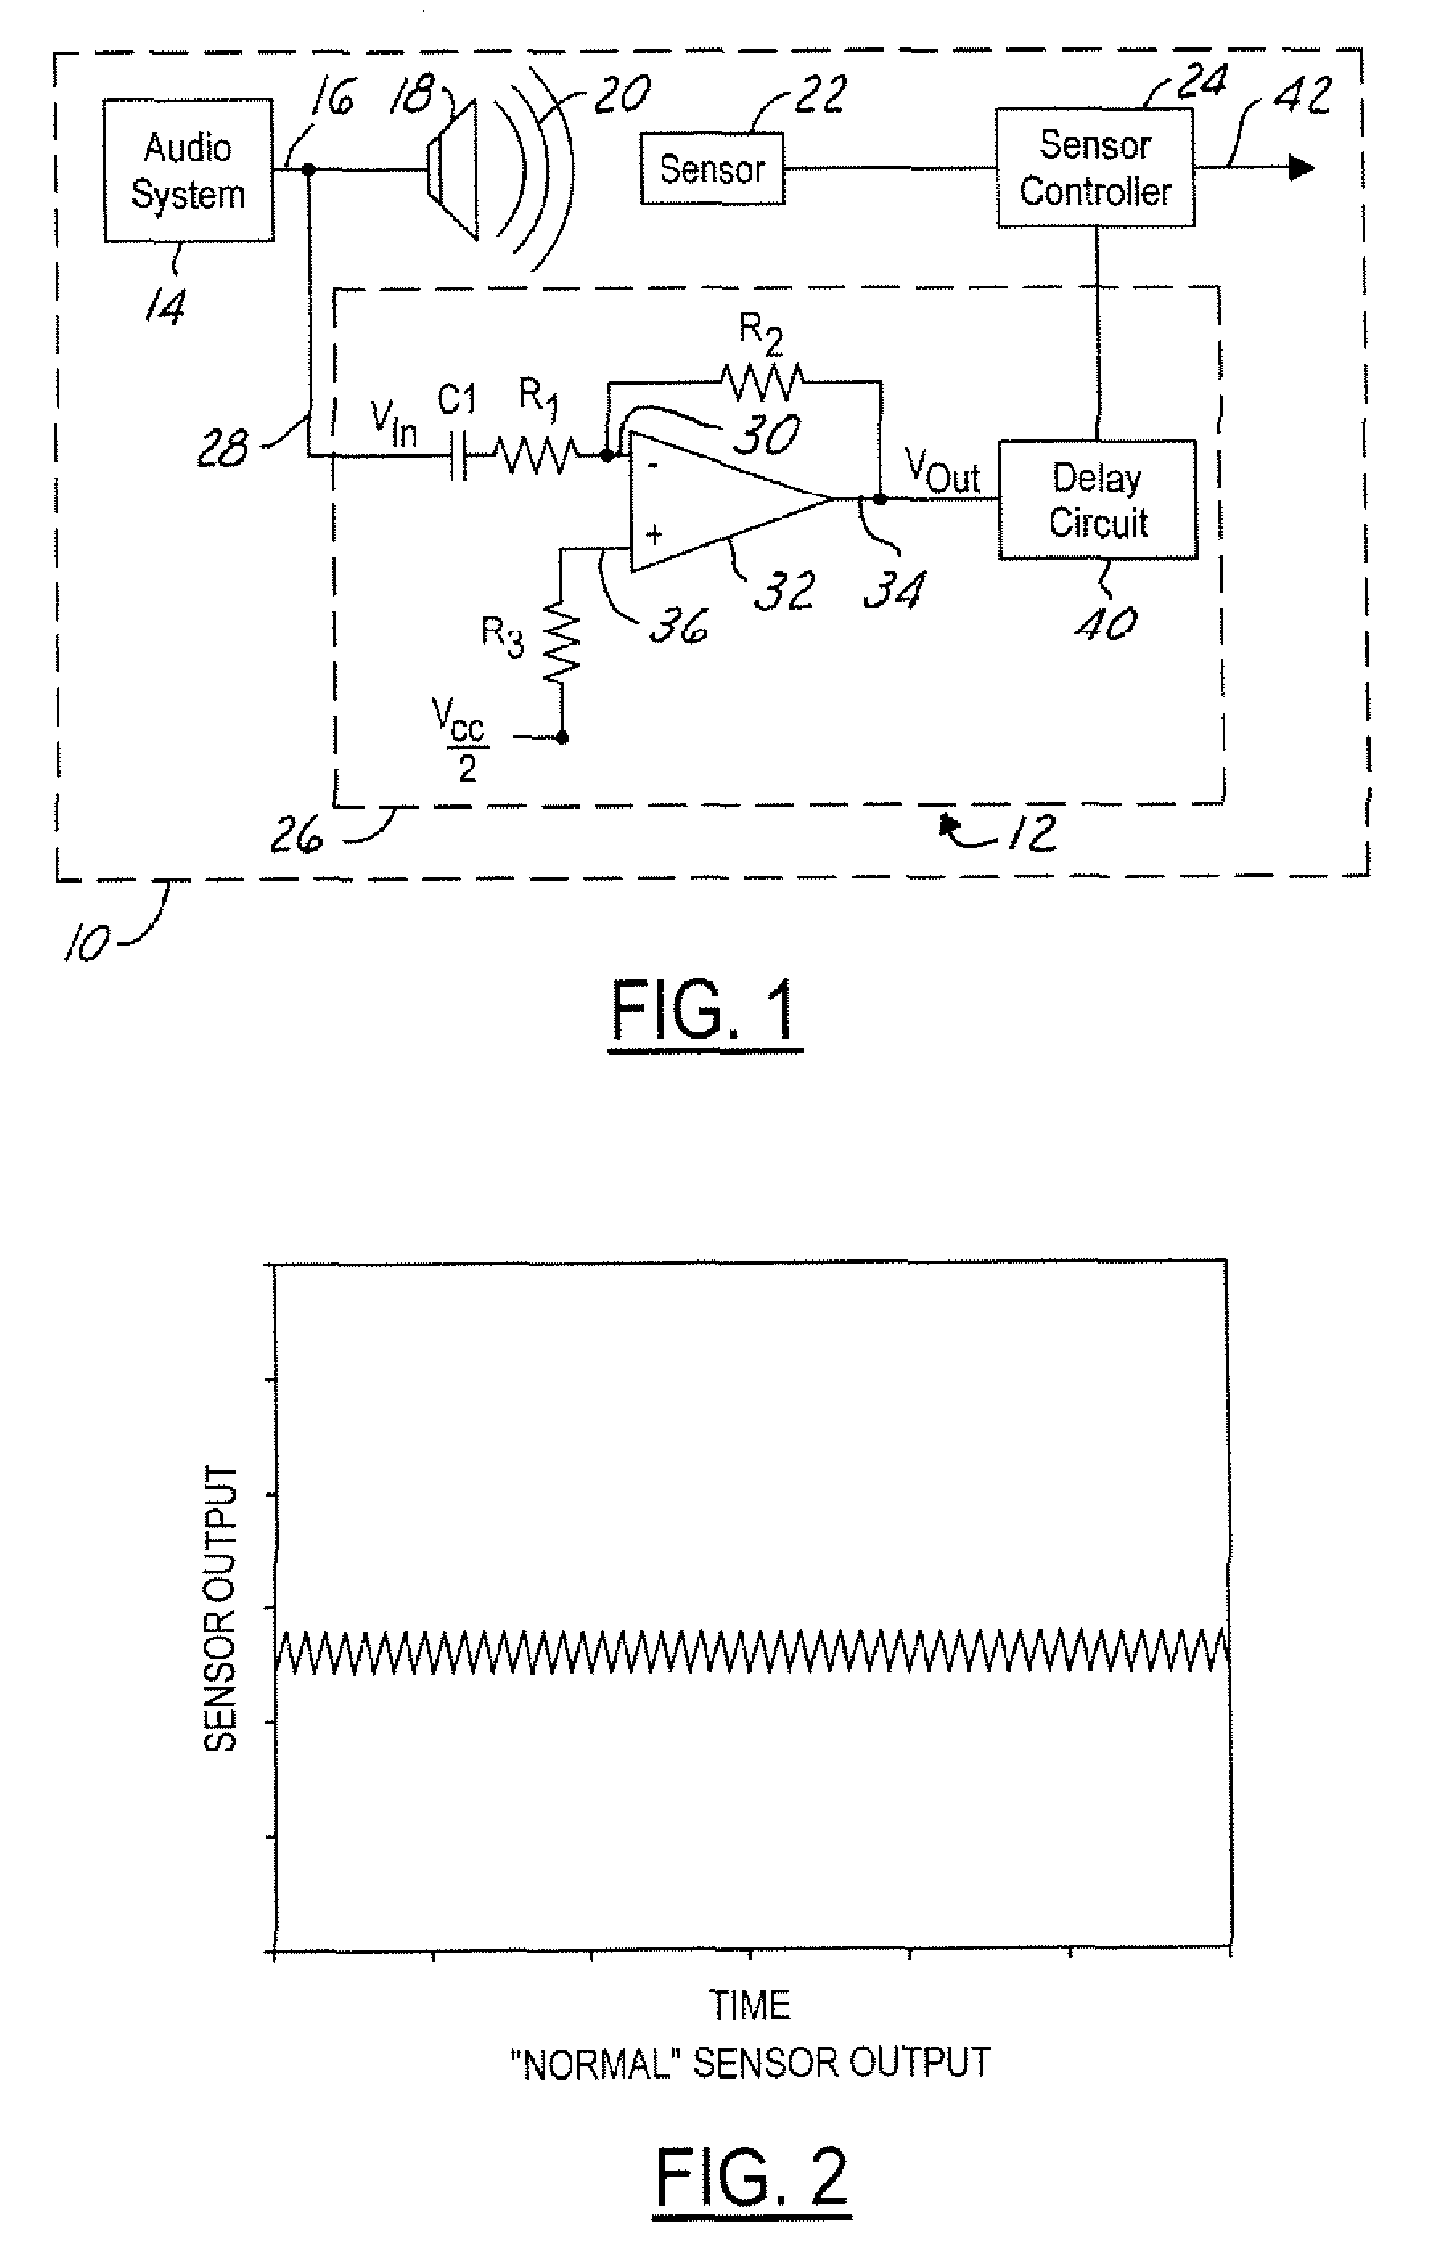 Audio noise cancellation system for a sensor in an automotive vehicle